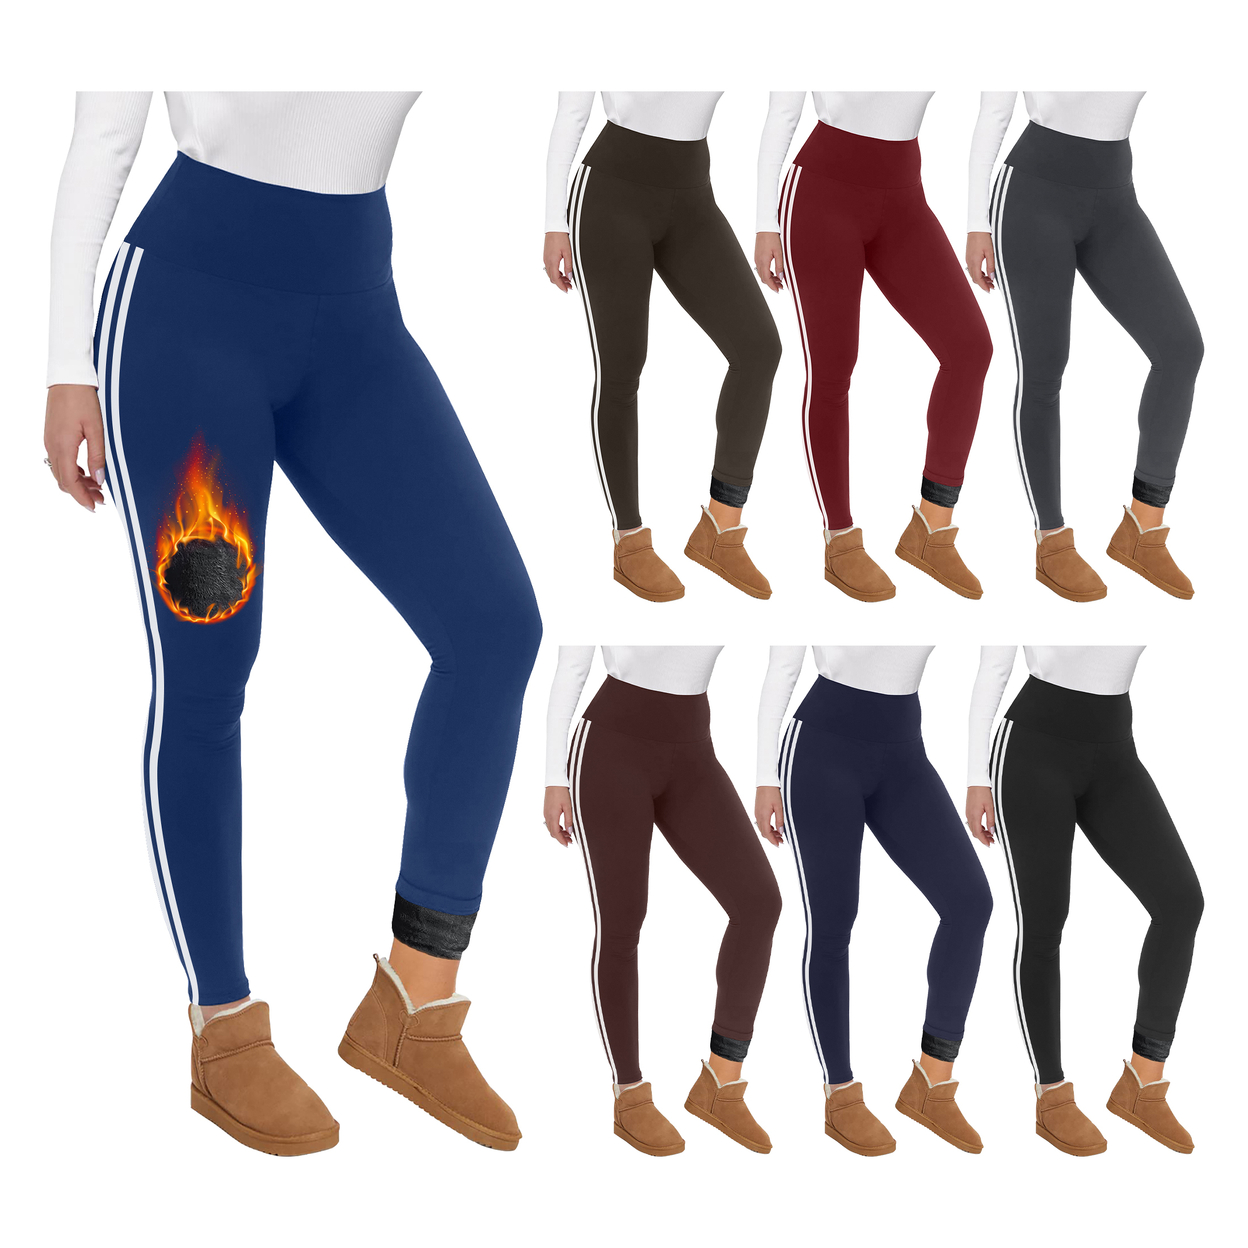 Multi-Pack: Women's Ultra Soft Winter Warm Cozy Striped Fur Lined Yoga Leggings - 1-pack, Assorted, Small